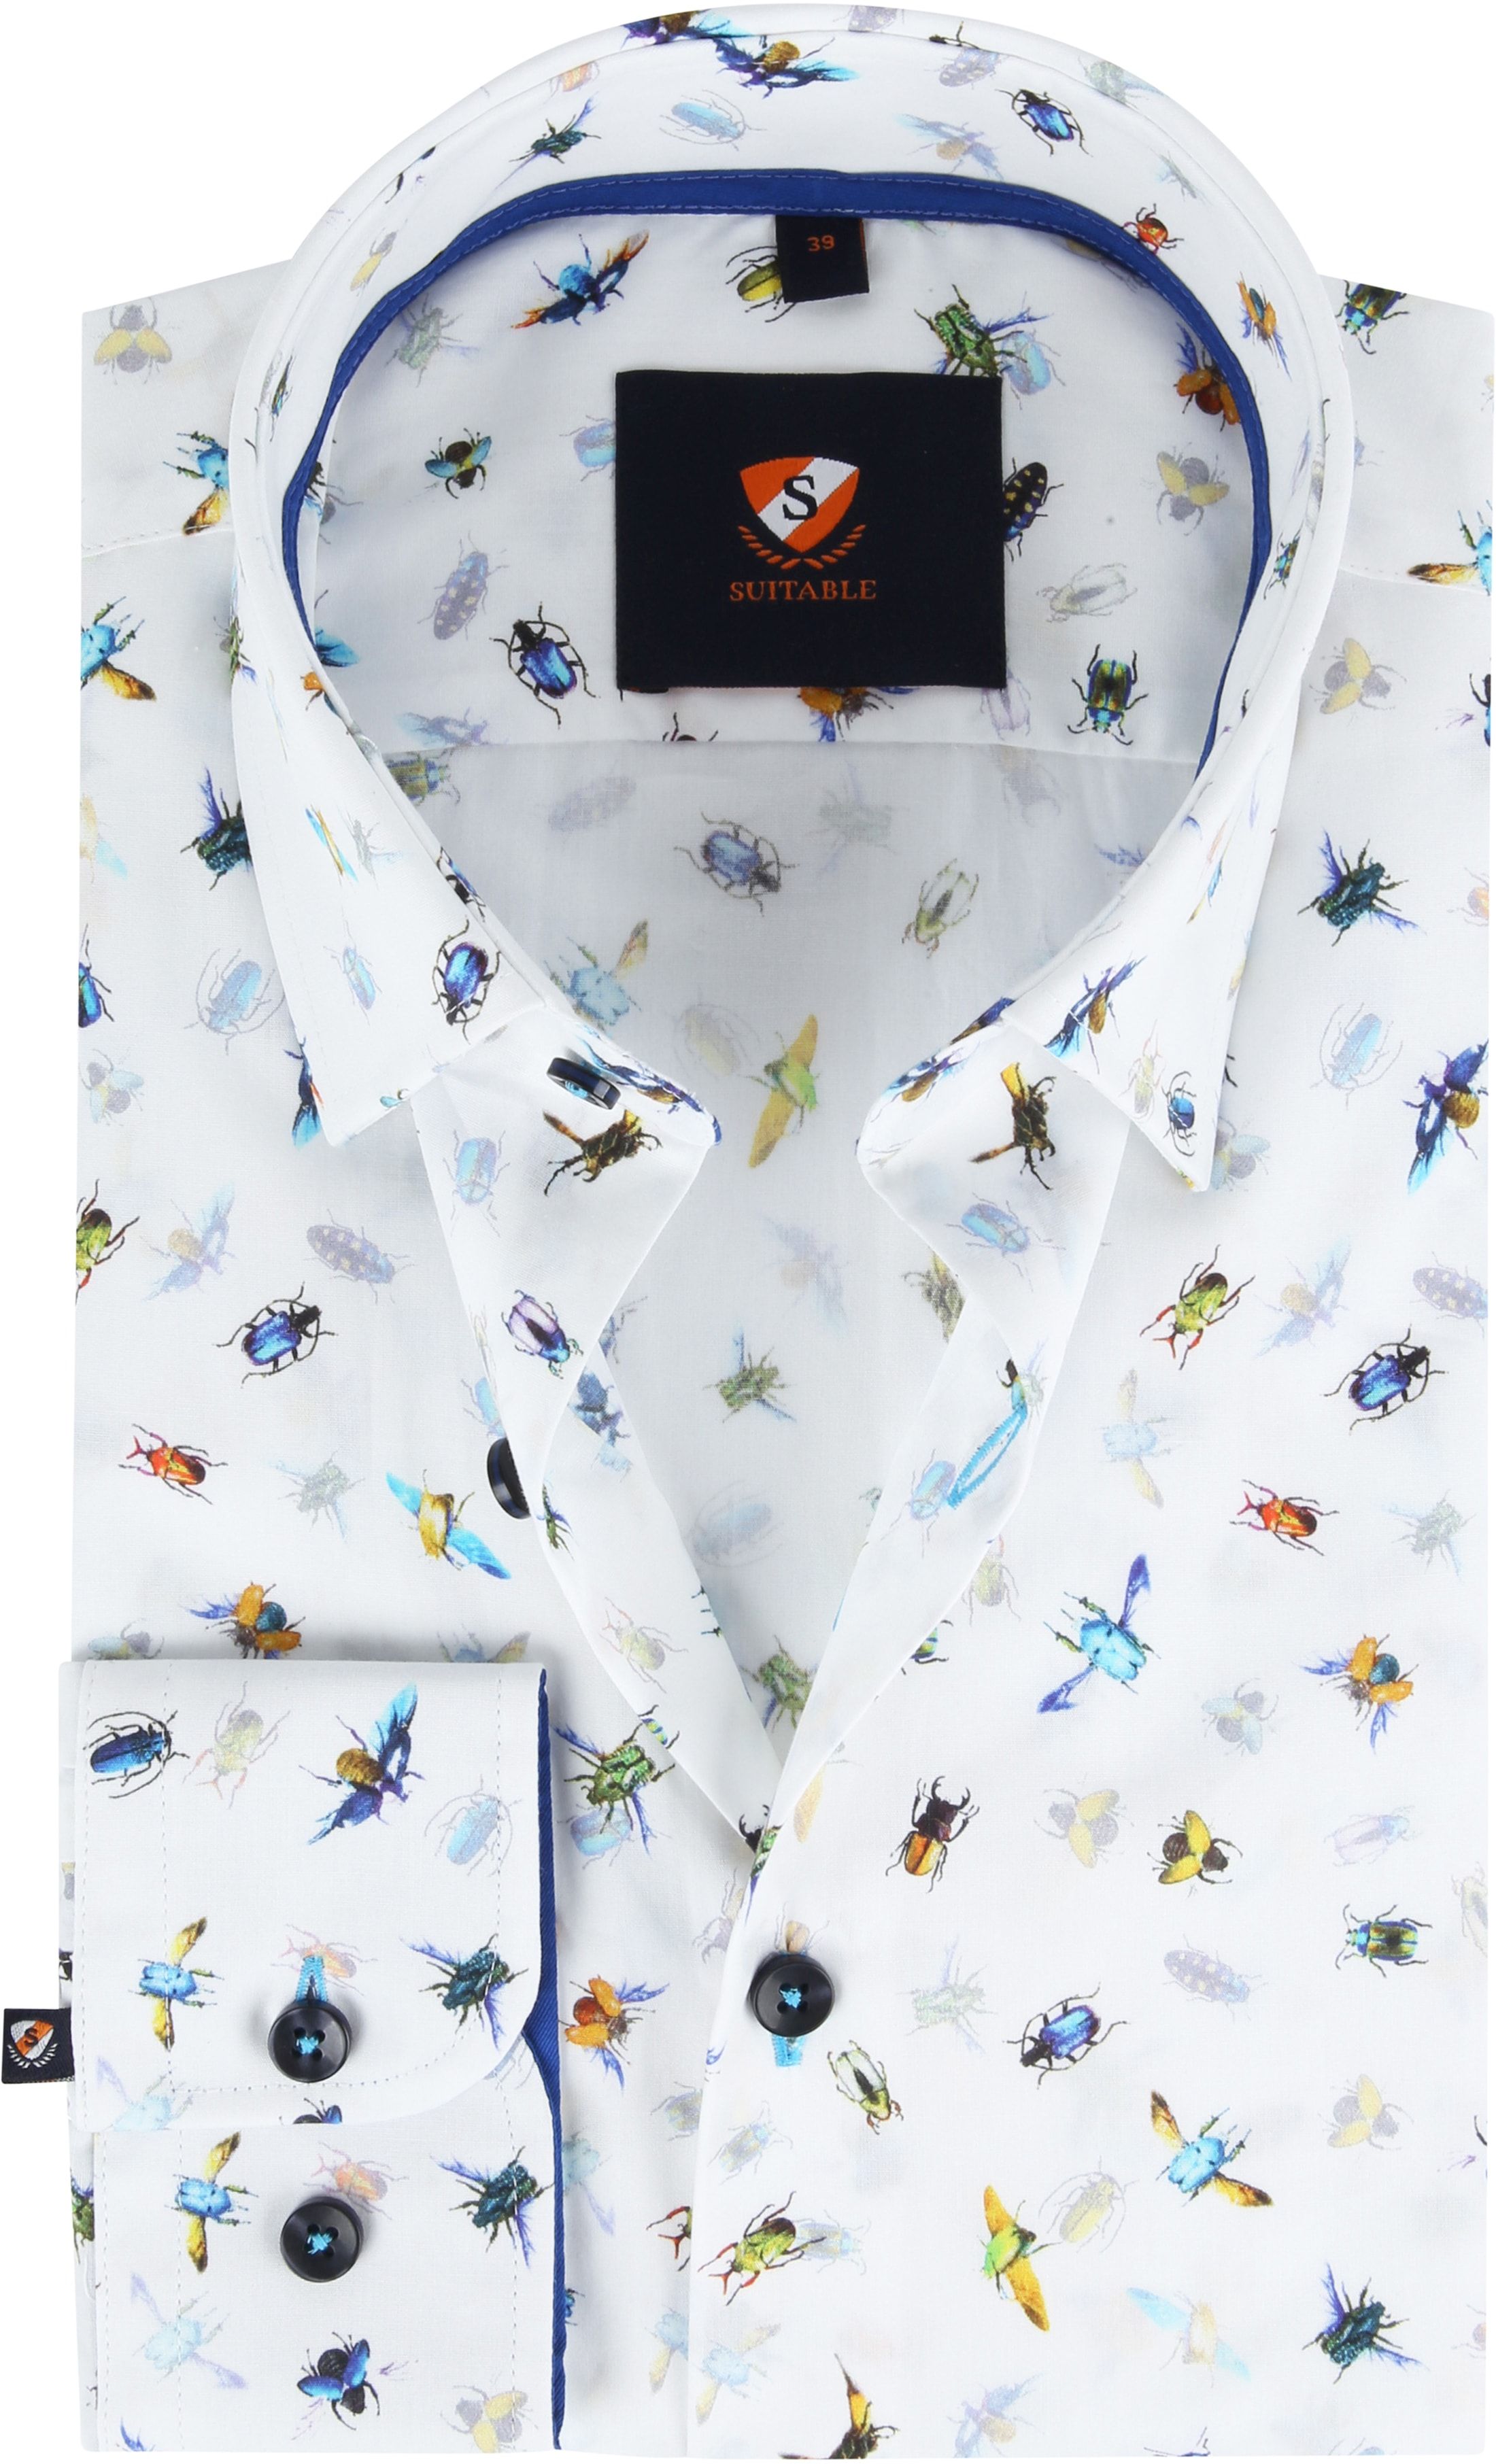 Suitable Shirt HBD SF Insect White size 15